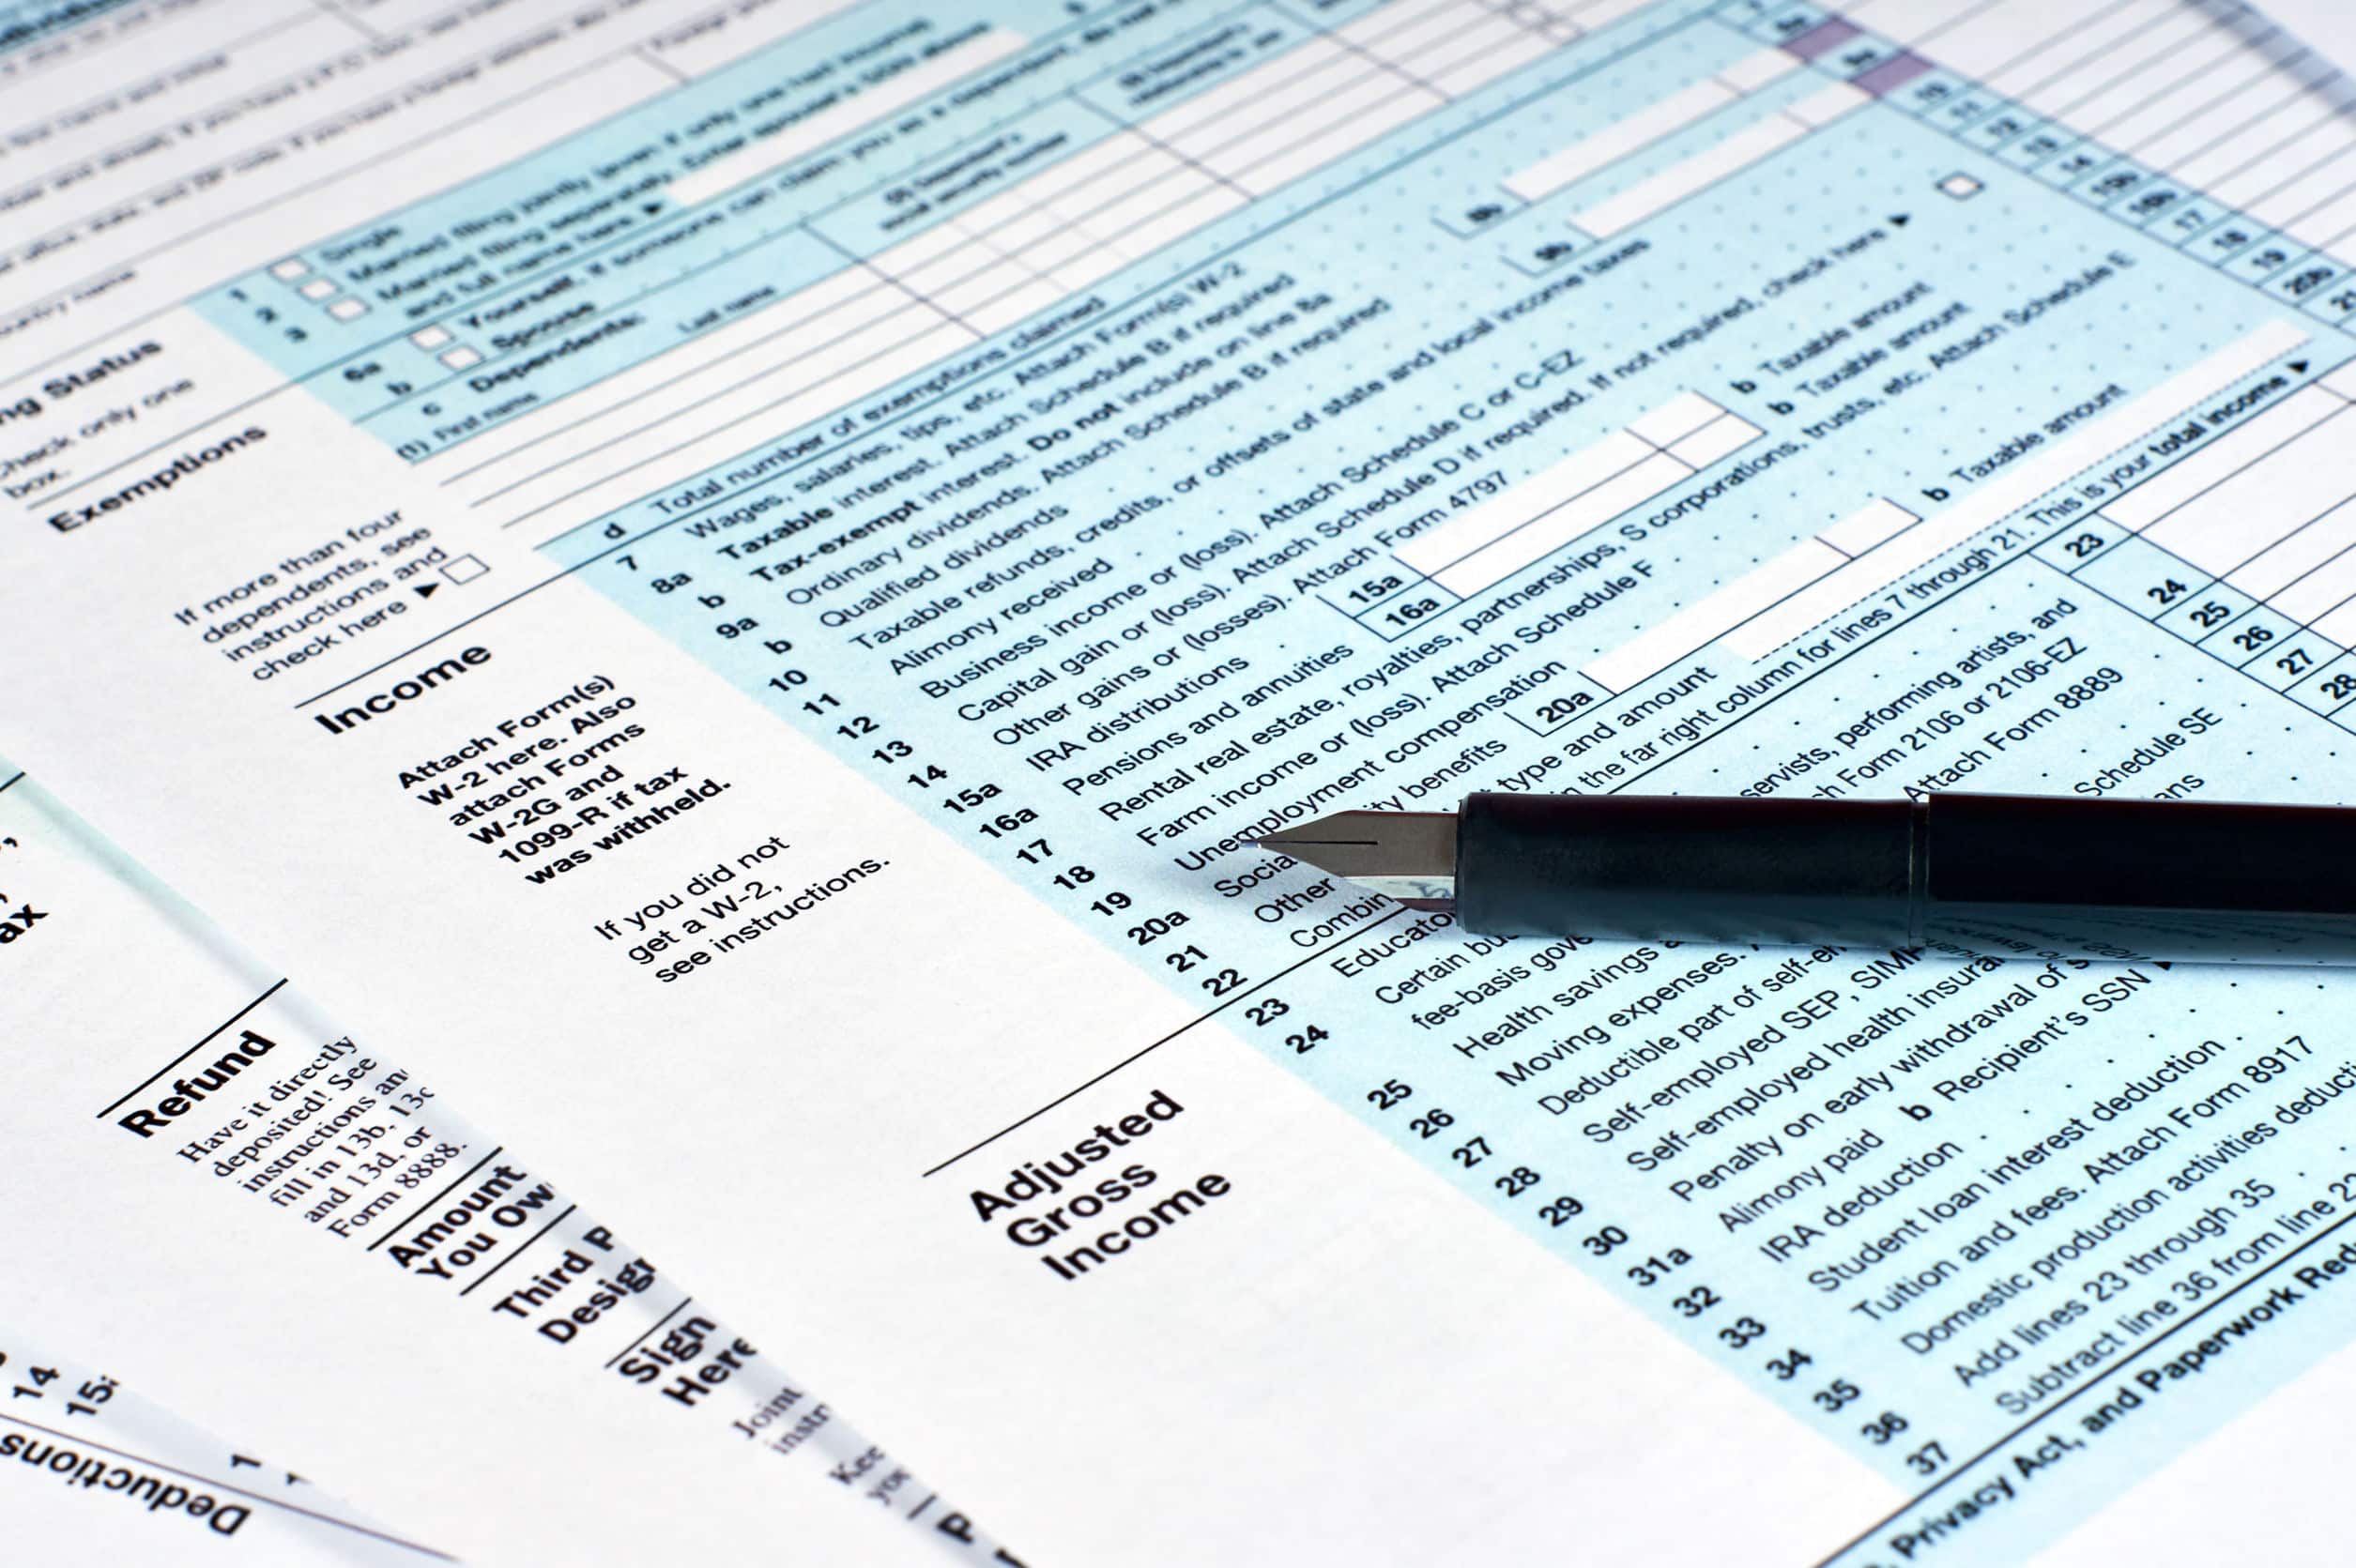 Tax reporting. Filling out tax forms